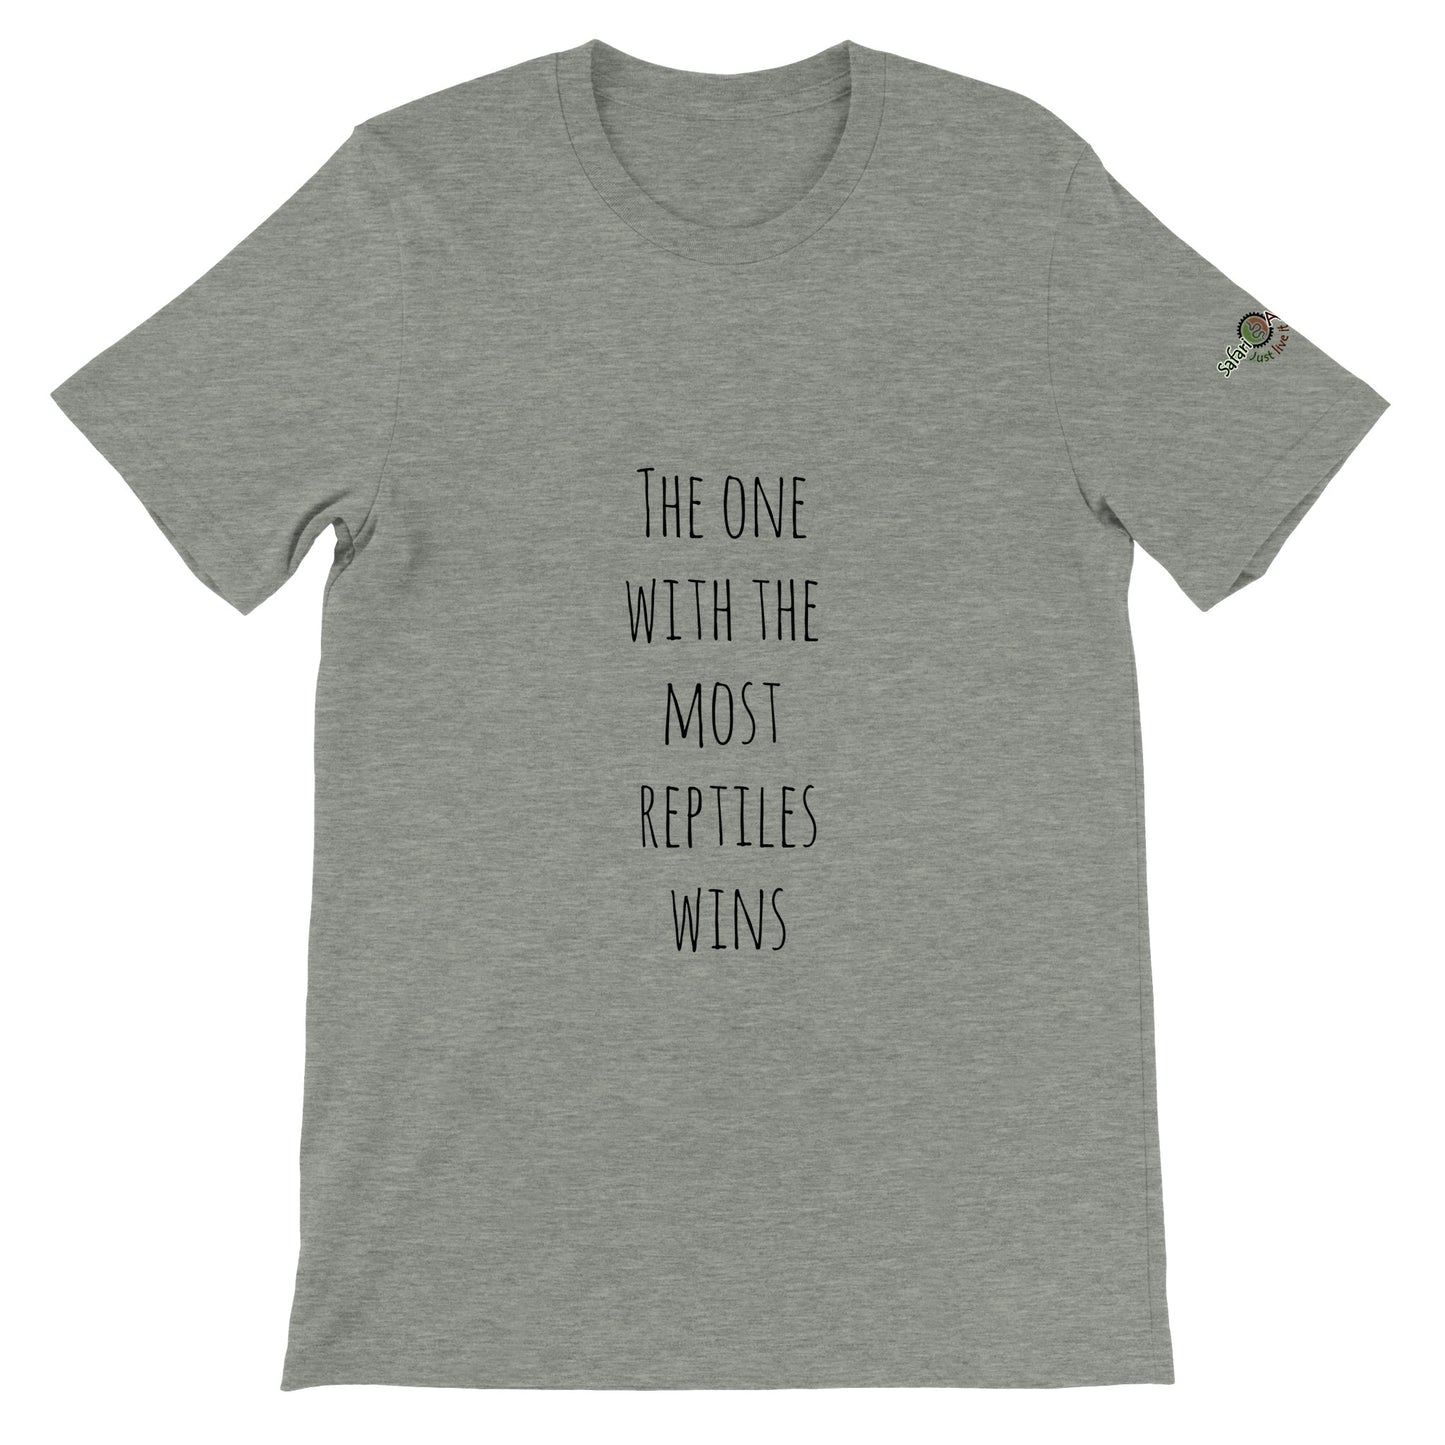 The one with the most reptiles wins unisex t-shirt